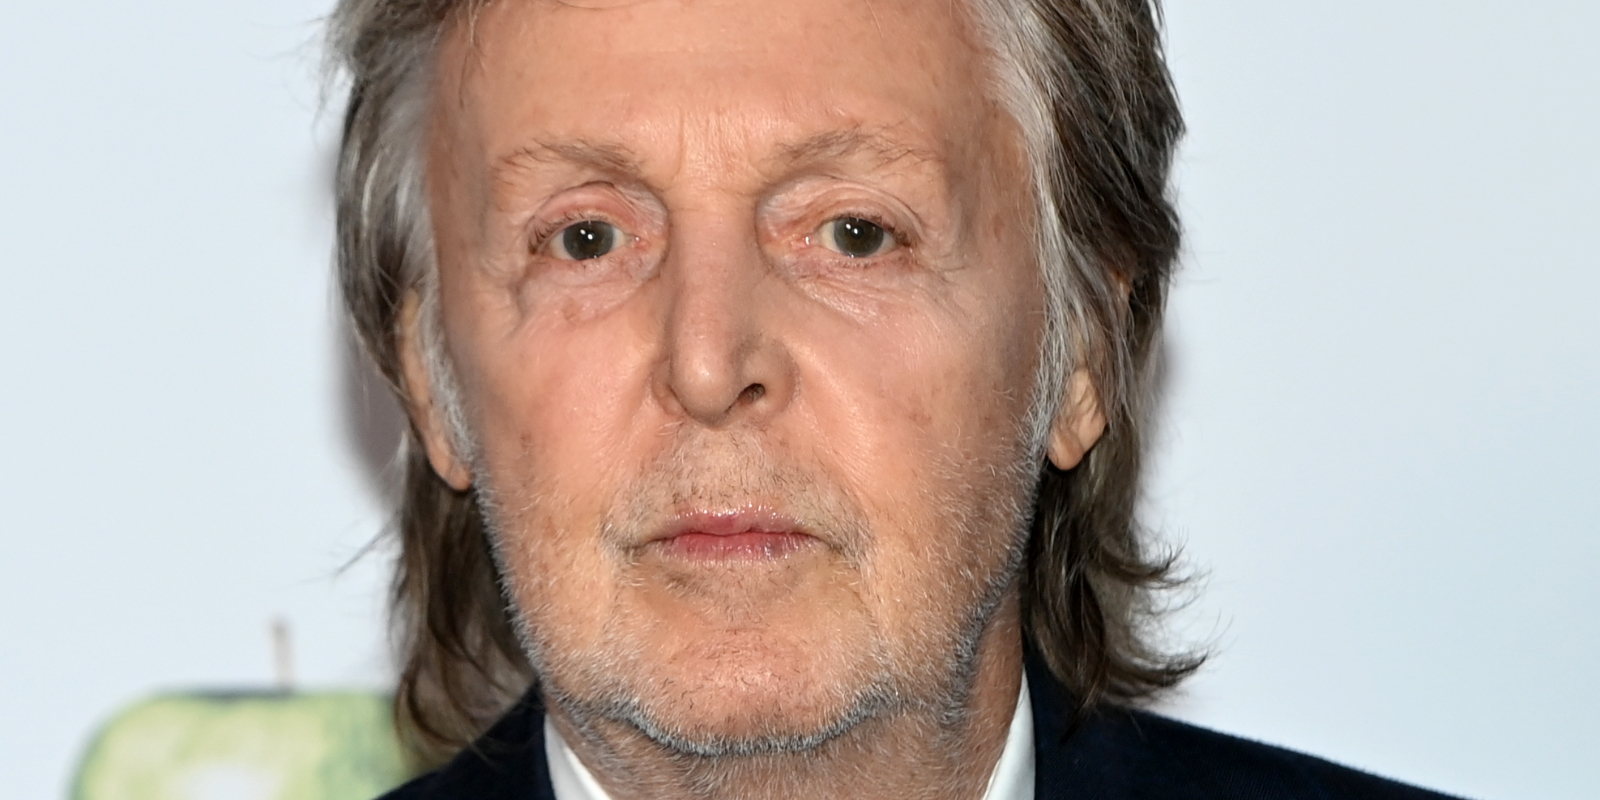 Paul McCartney photographed in 2021 at the UK Premiere of "The Beatles: Get Back" at Cineworld Empire in London, England.